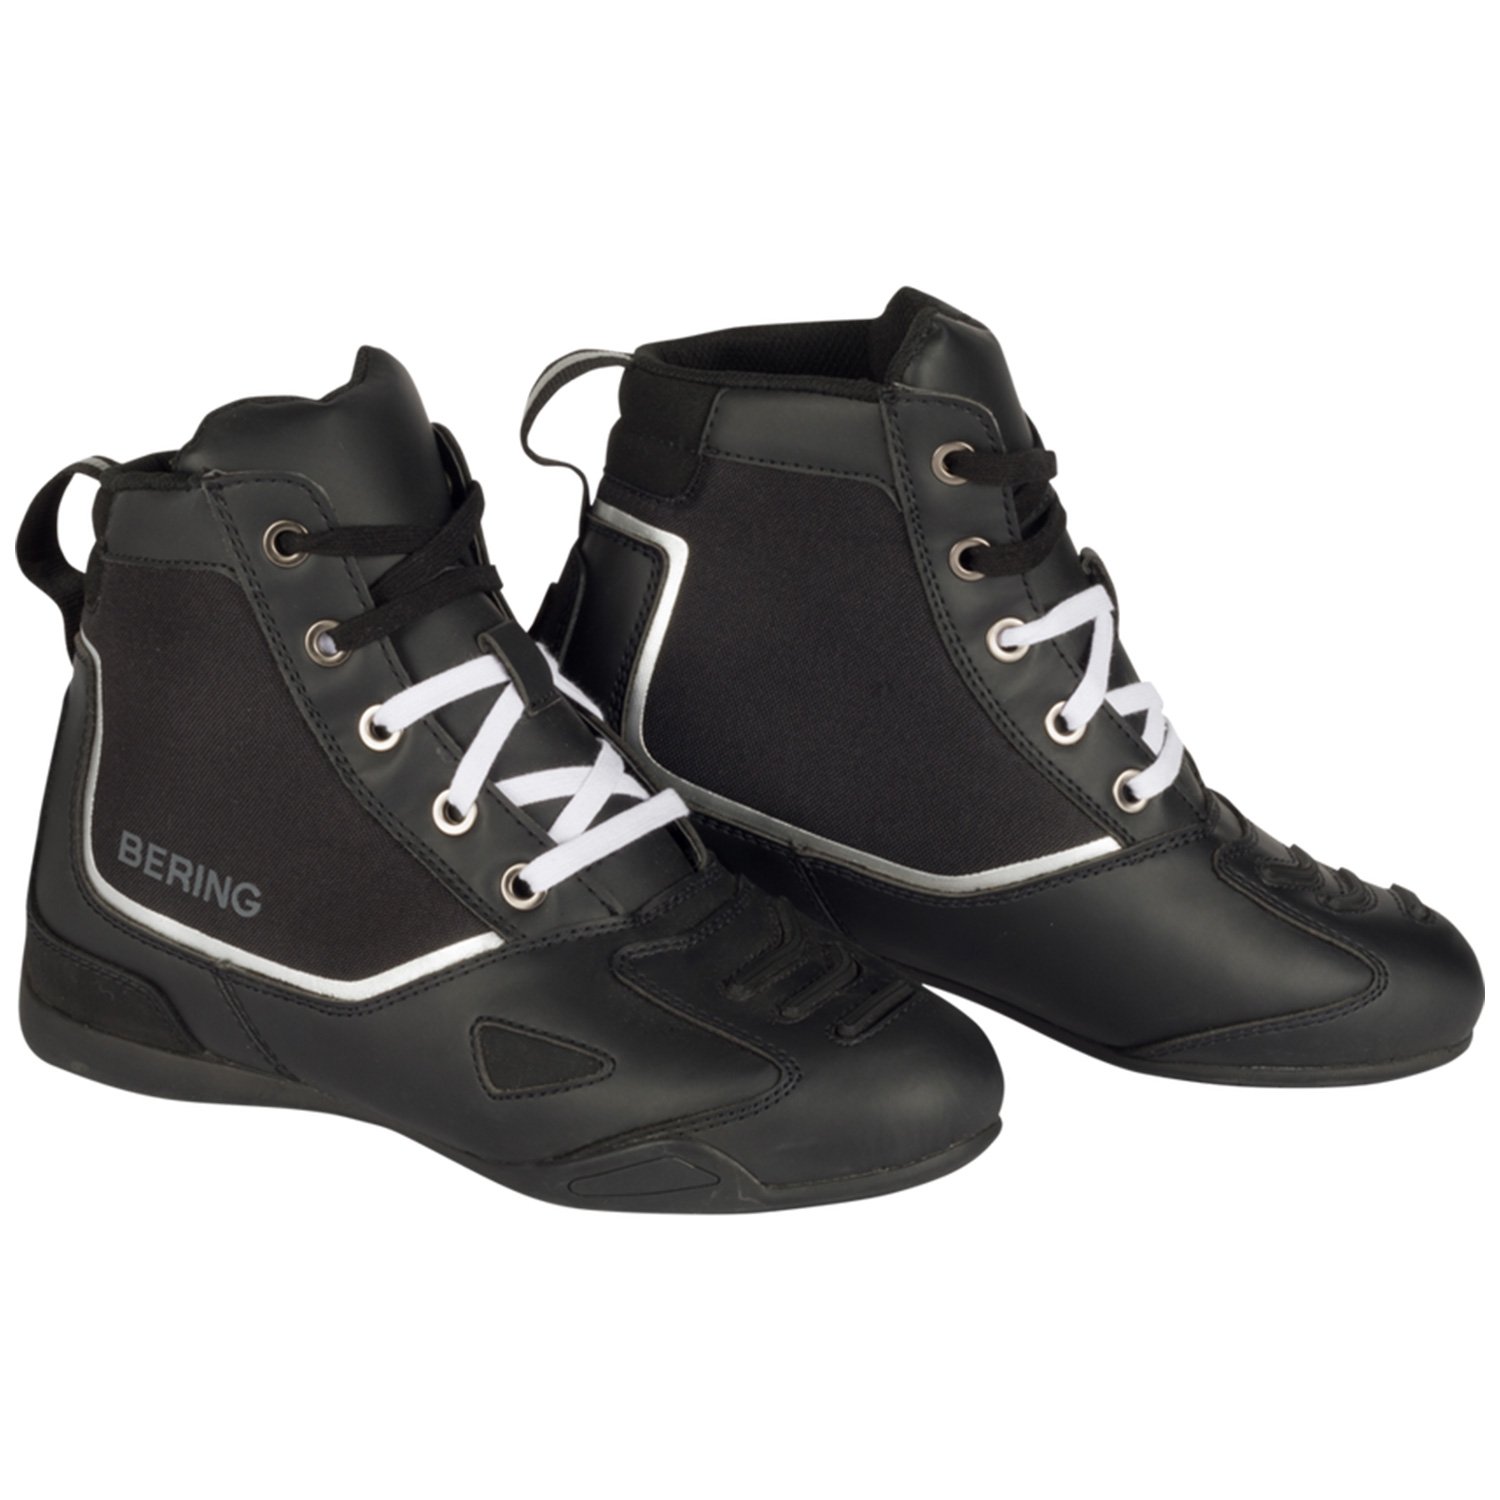 Image of Bering Active Shoes Black Size 41 ID 3660815184219